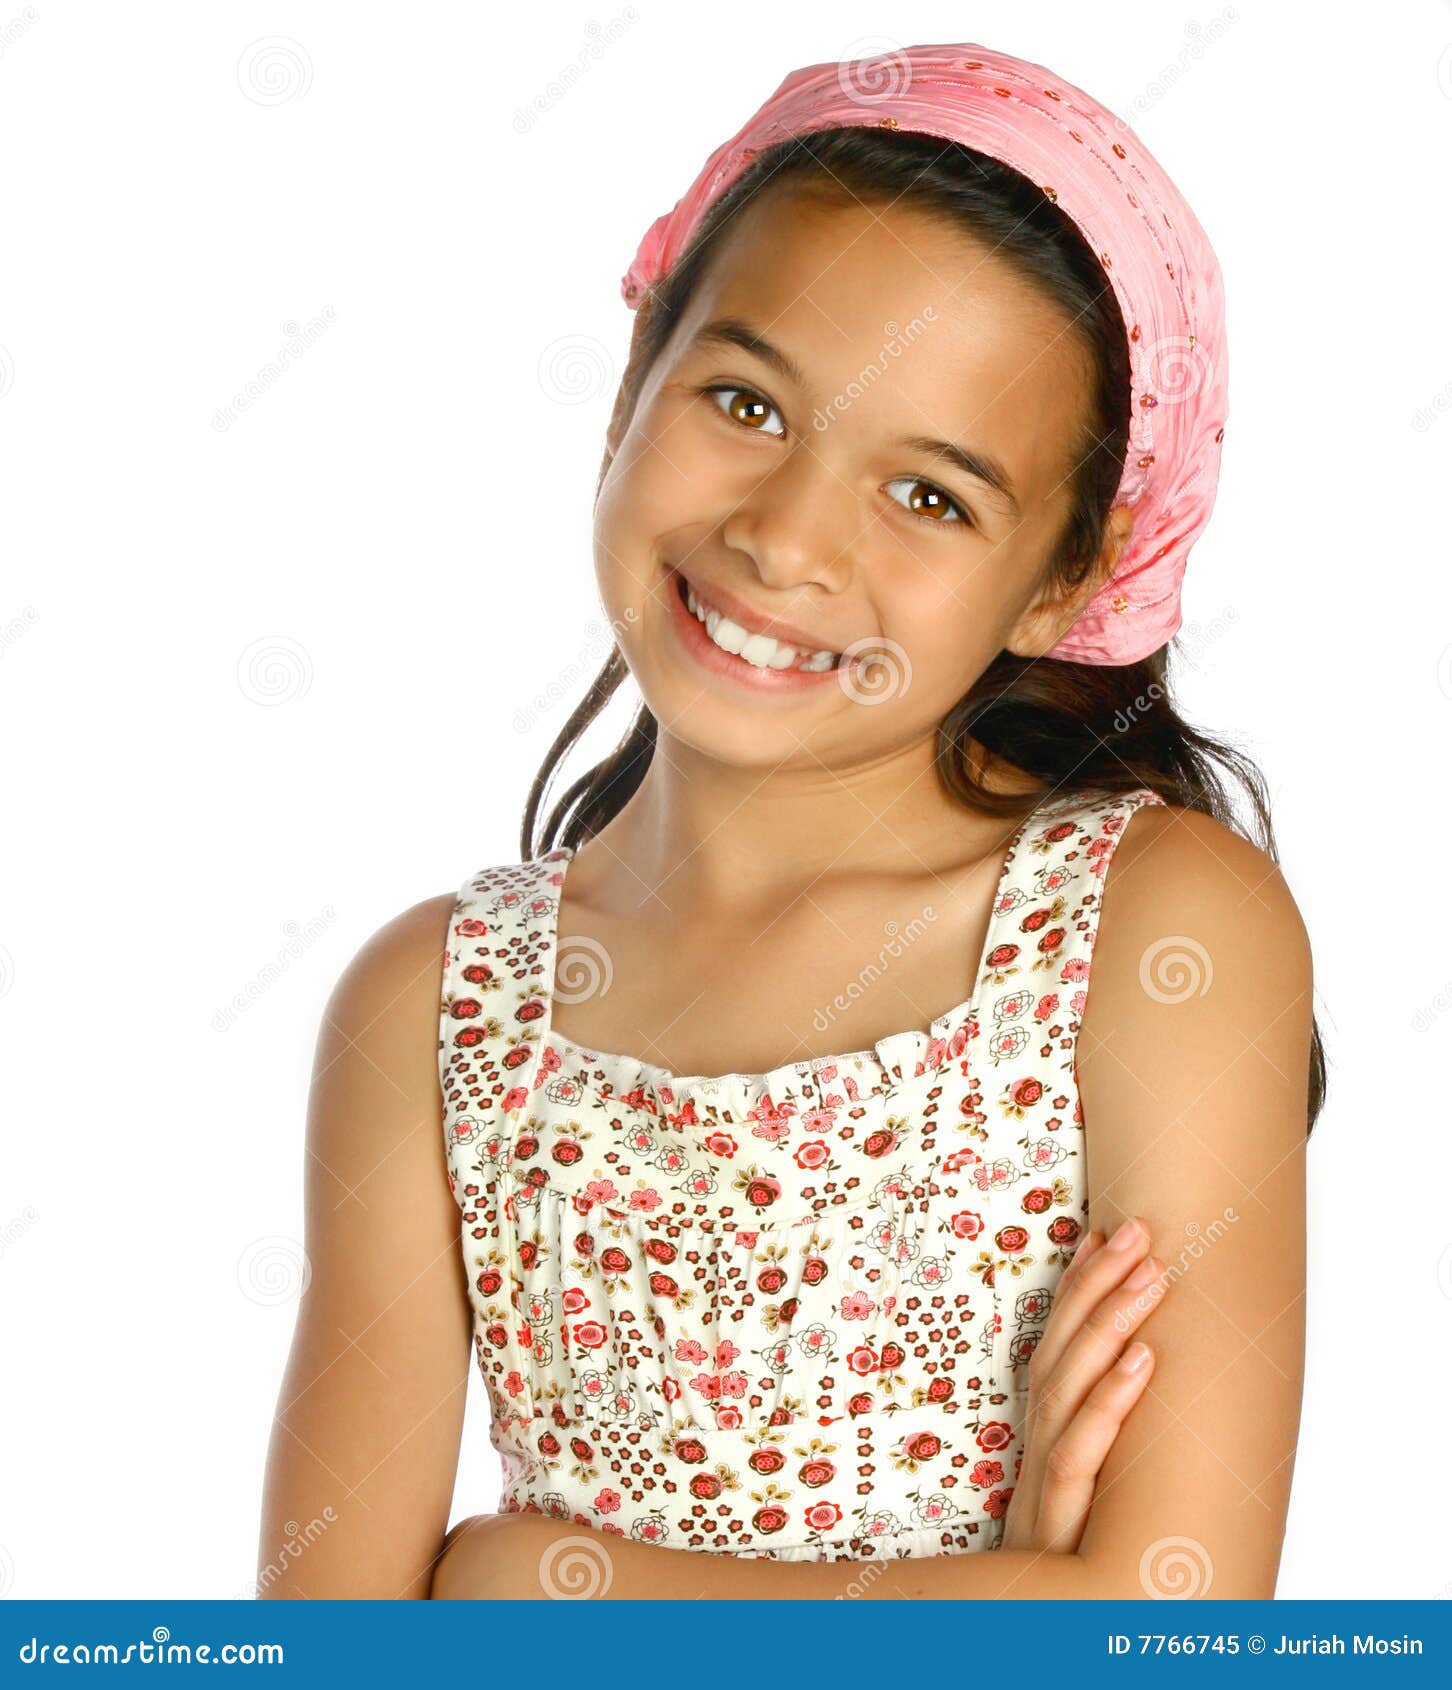 girl of mix ethnicity in pink bandanna